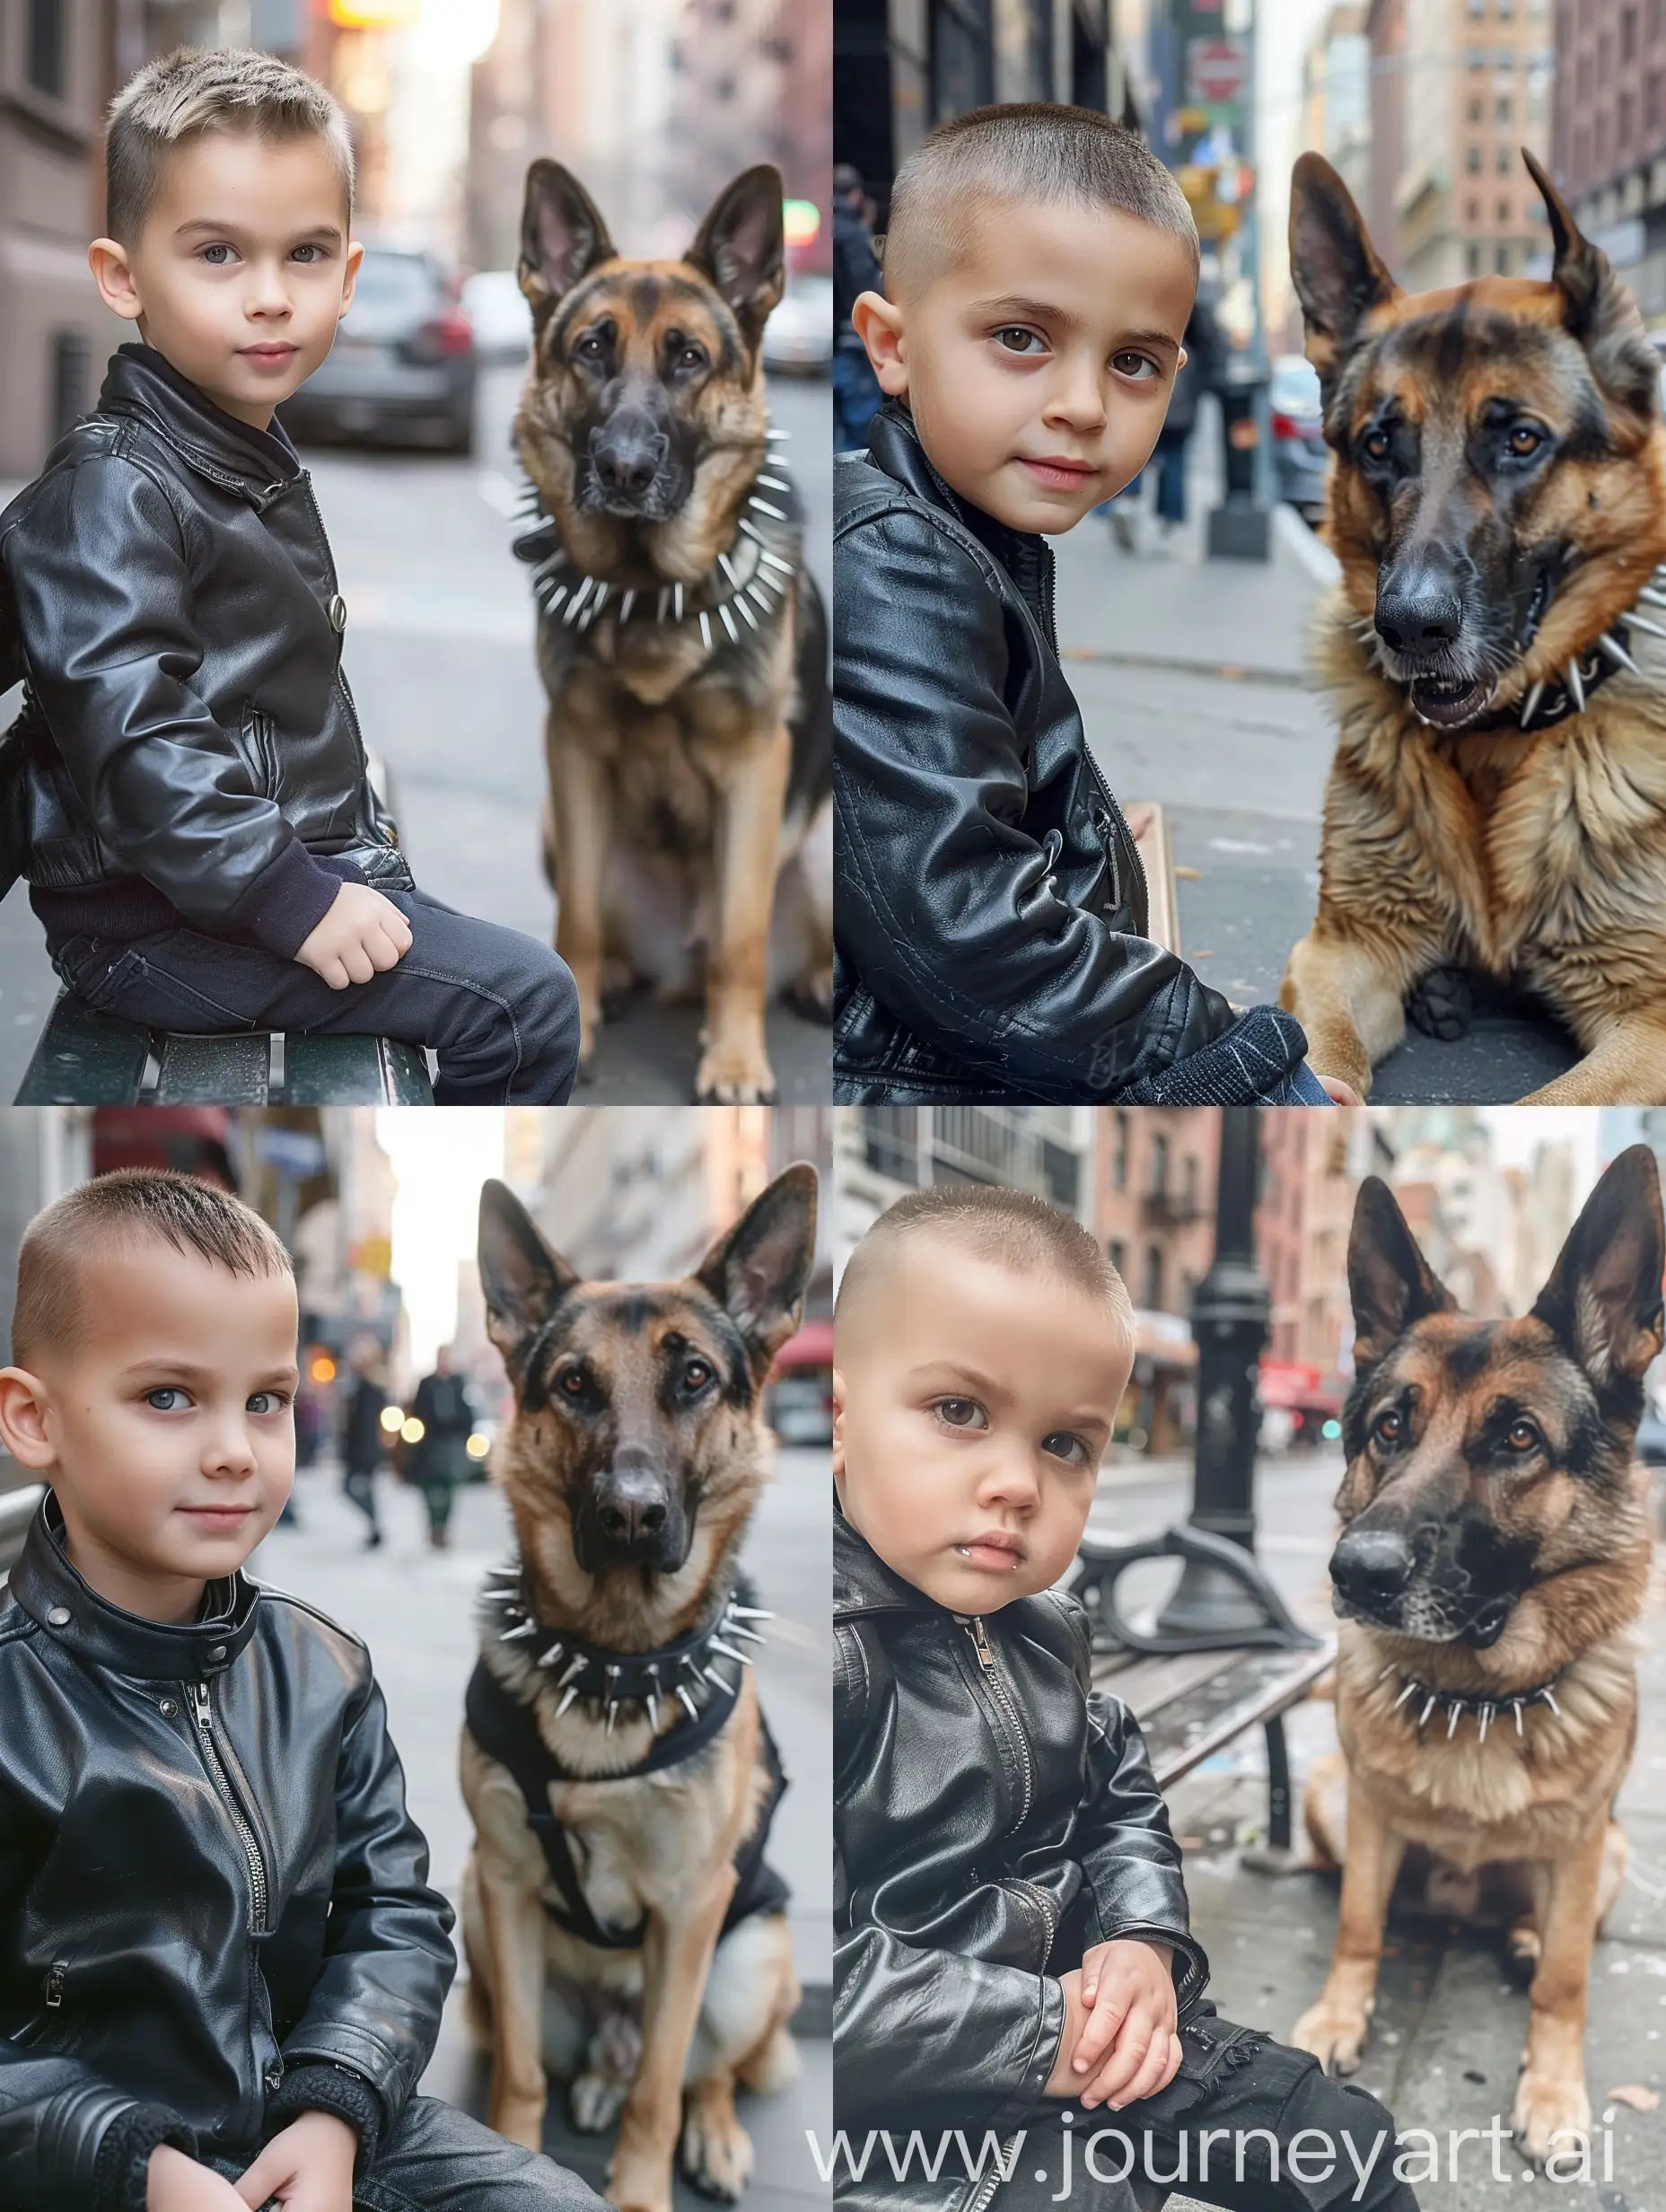 A little boy with a short haircut, seven years old, sitting on a bench in a black leather jacket on a city street next to a German Shepherd dog with a spiked collar sitting on the ground, close-up, realistic photo, hyperrealism, face clearly visible, looking at the camera, close-up photo, light-colored photo